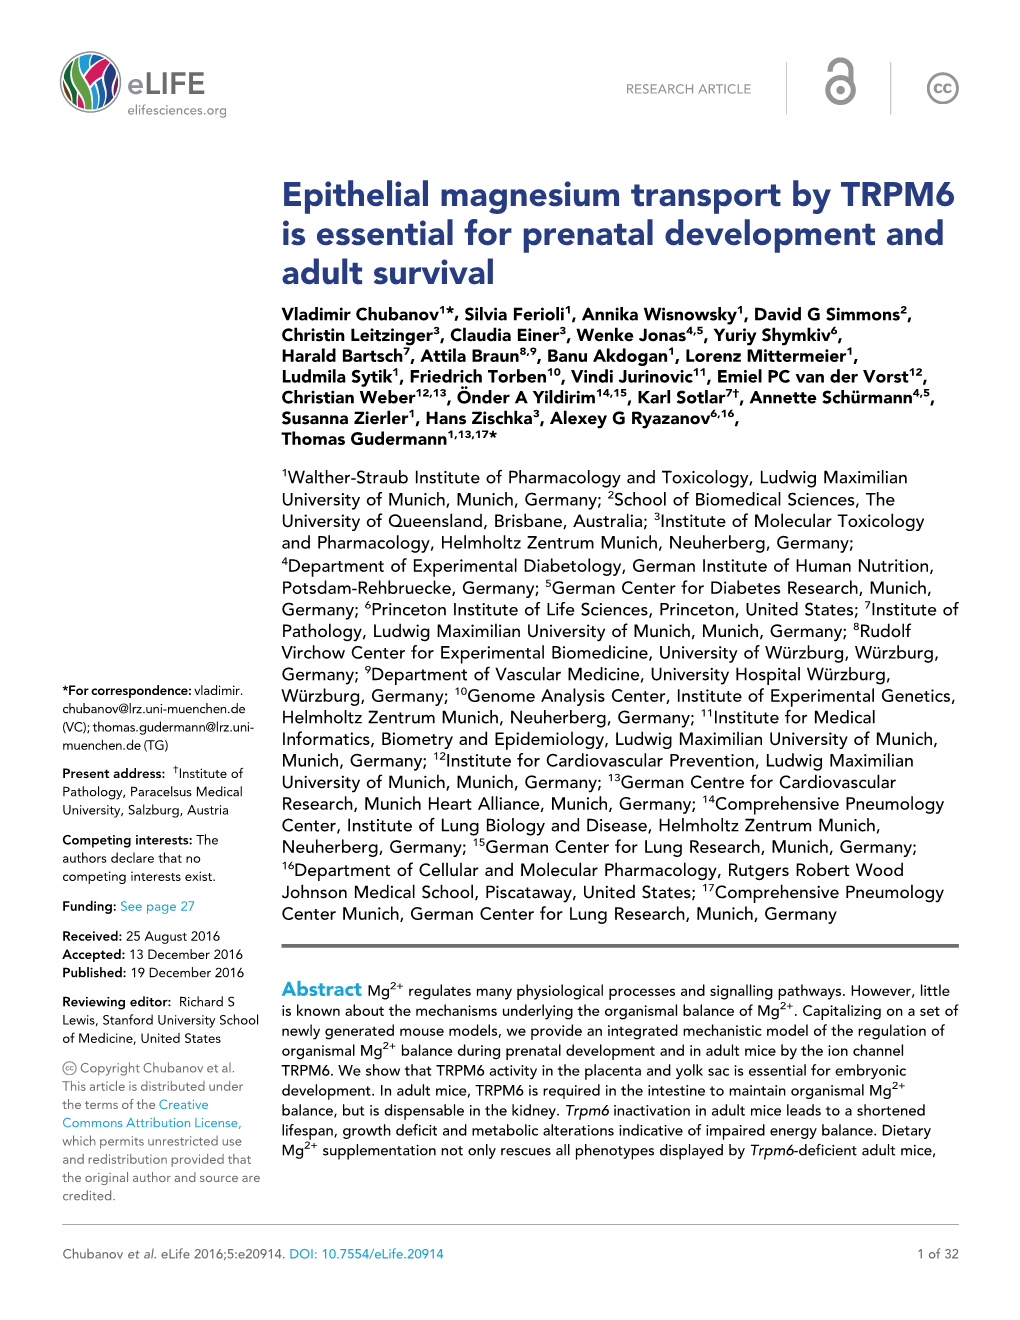 Epithelial Magnesium Transport by TRPM6 Is Essential for Prenatal